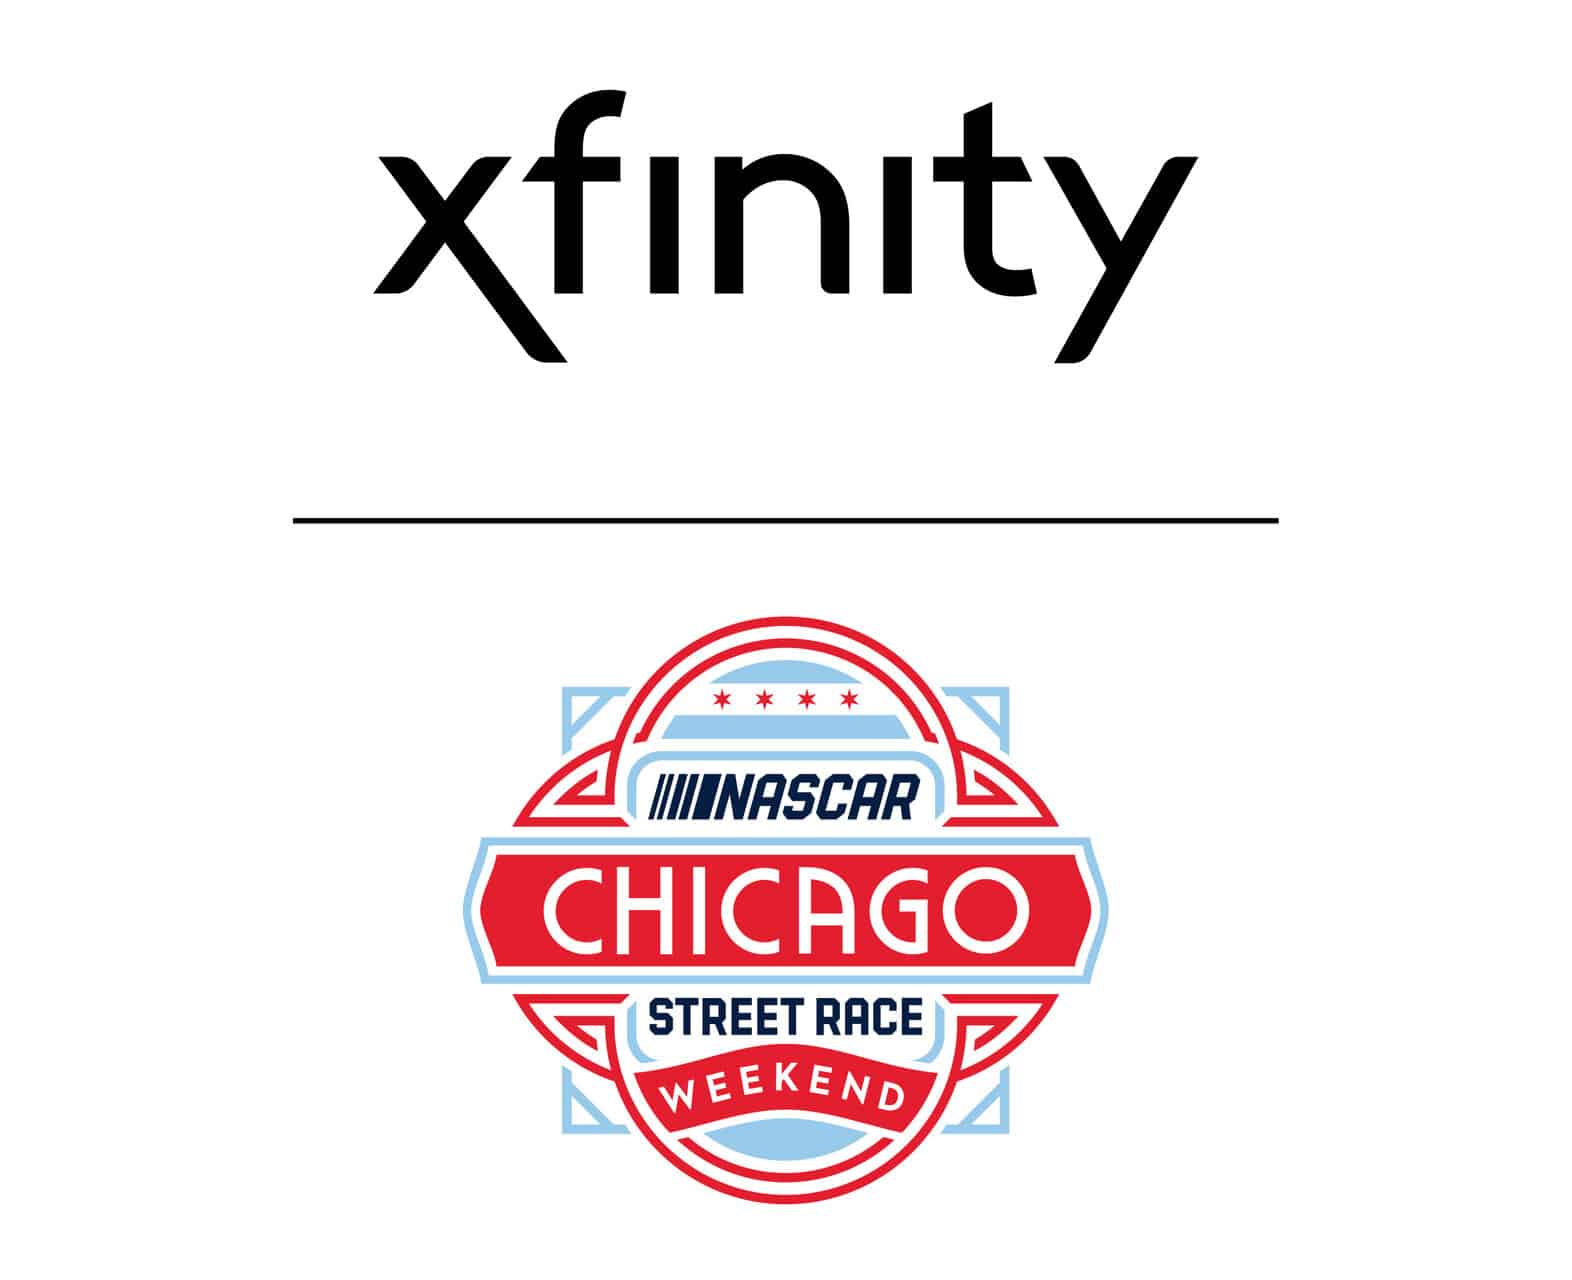 Xfinity has joined the NASCAR Chicago Street Race as a founding partner.